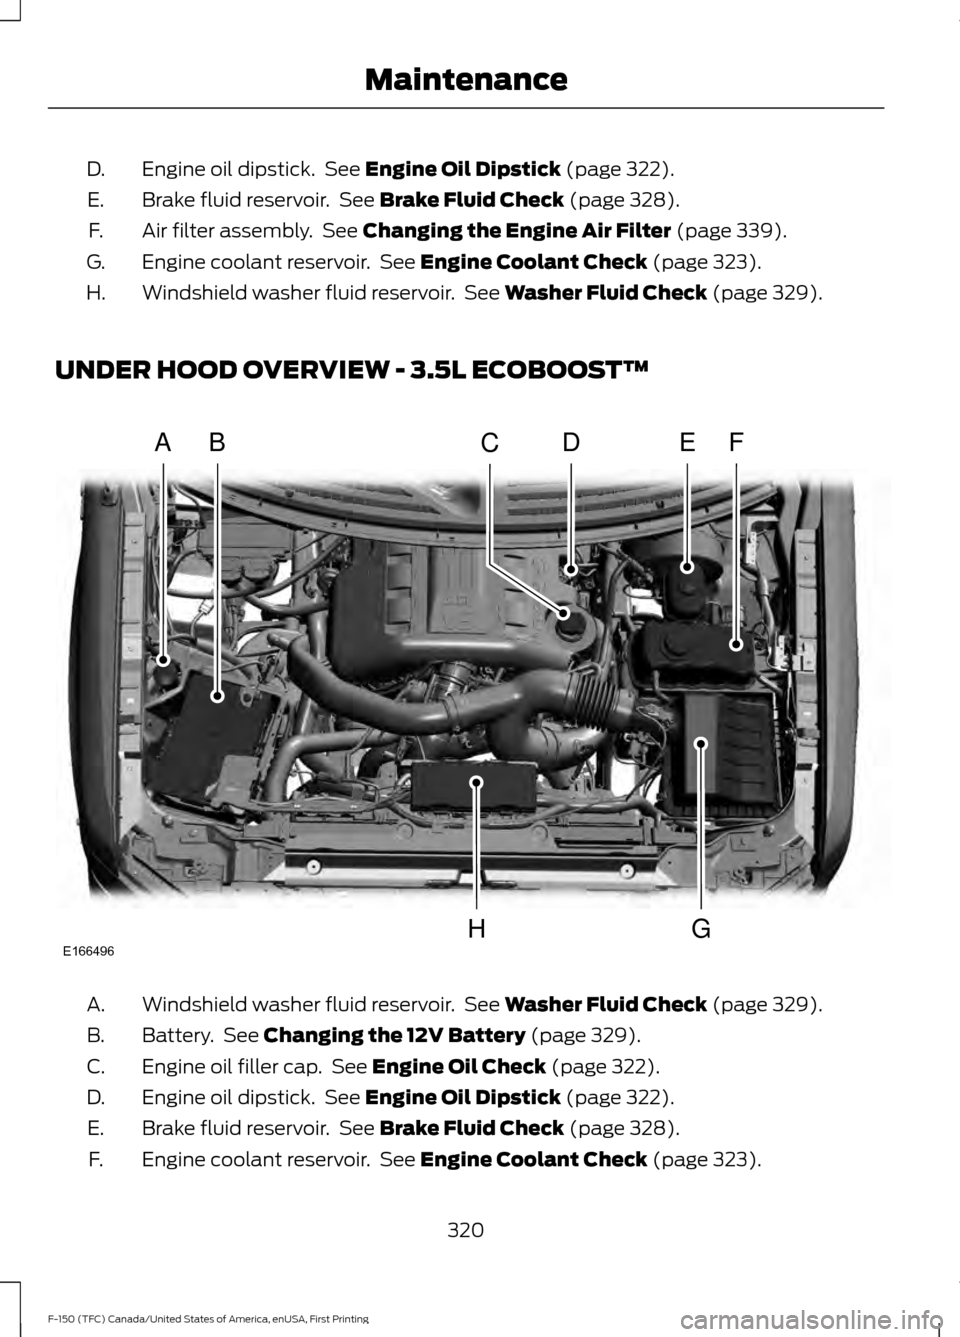 FORD F150 2017 13.G Owners Manual Engine oil dipstick.  See Engine Oil Dipstick (page 322).
D.
Brake fluid reservoir.  See 
Brake Fluid Check (page 328).
E.
Air filter assembly.  See 
Changing the Engine Air Filter (page 339).
F.
Engi